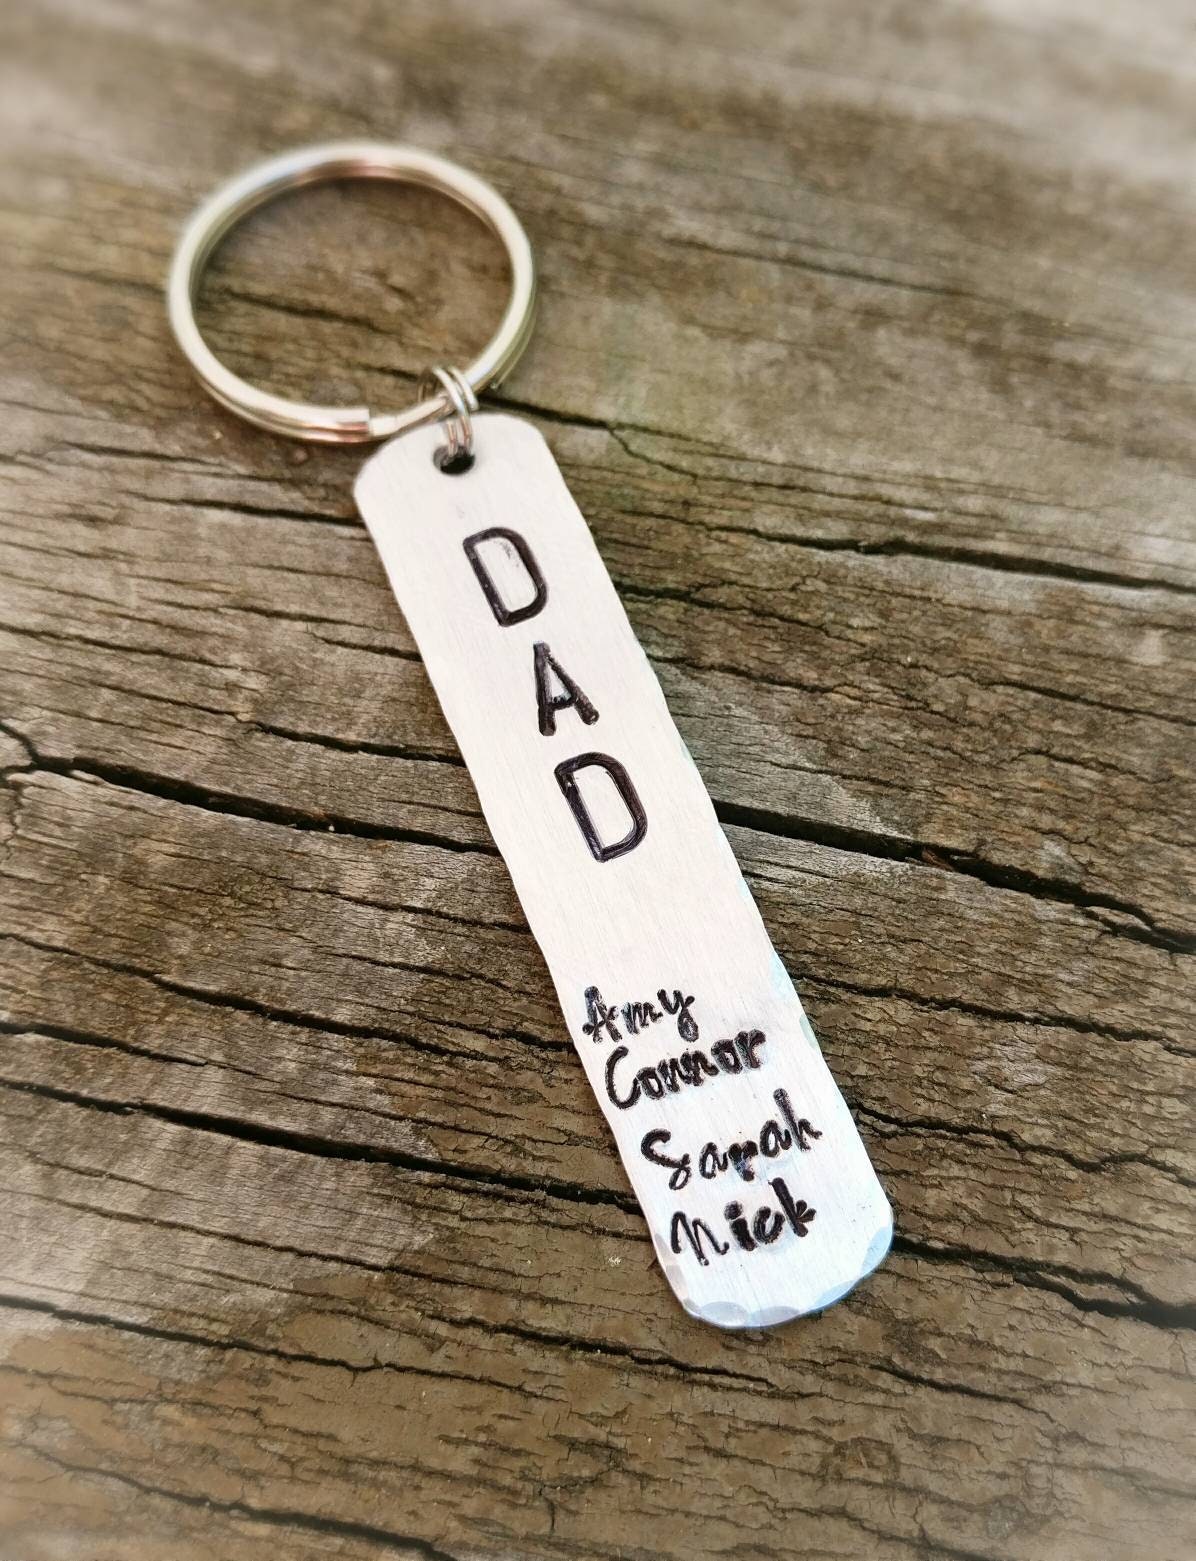 GIFT FOR DAD - Dad Keychain, Family Keychain, dad gift, dad gift with names, dad keychain, keychain for dad, Father's Day for Dad